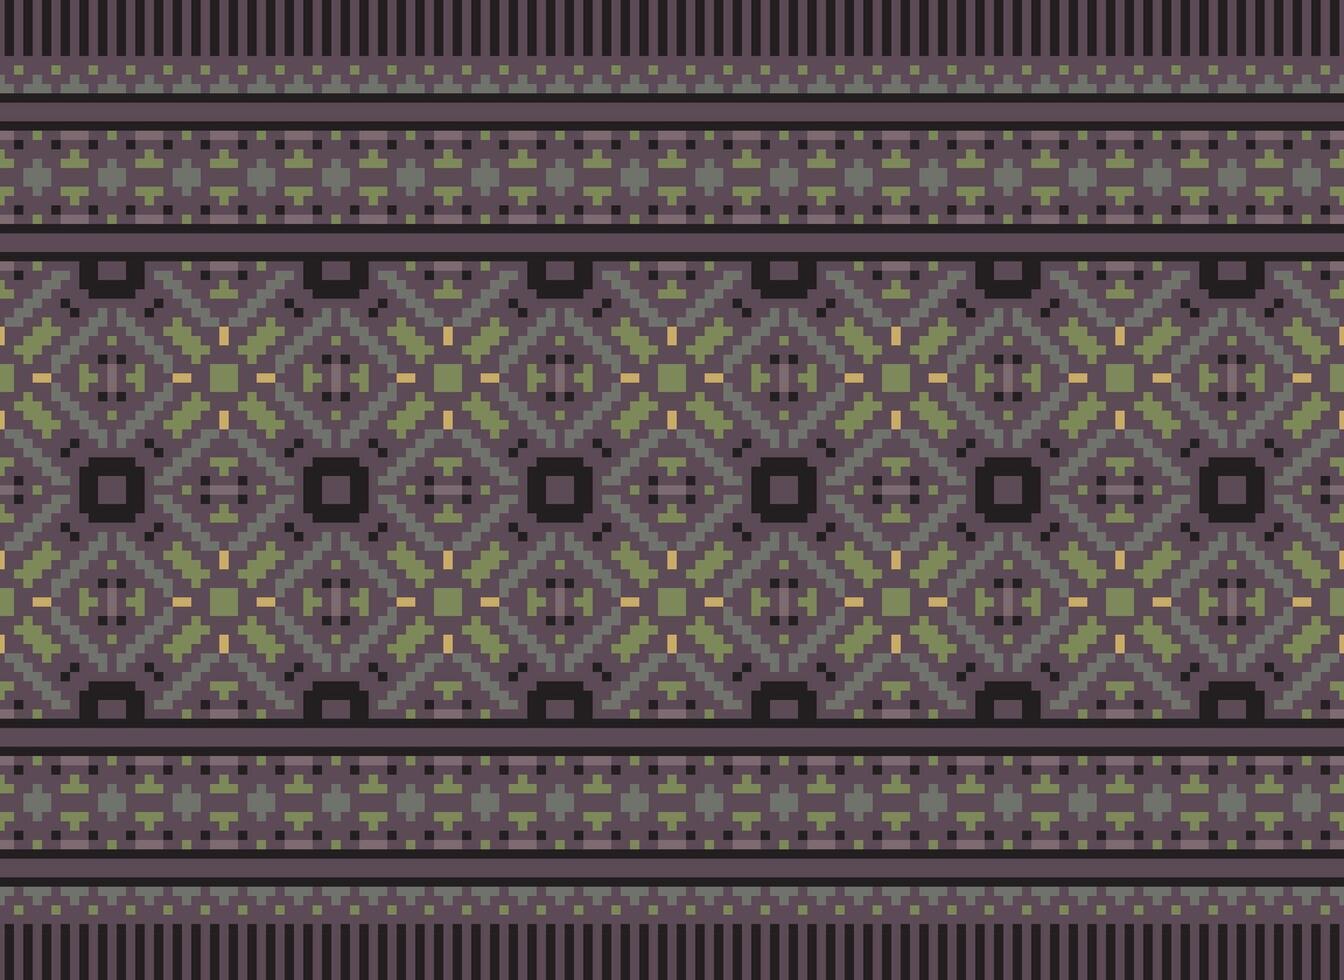 Knitted ethnic pattern, Vector cross stitch oriental background, Embroidery retro jacquard style, Purple pattern square native, Design for textile, fabric, carpet, rug, fibres